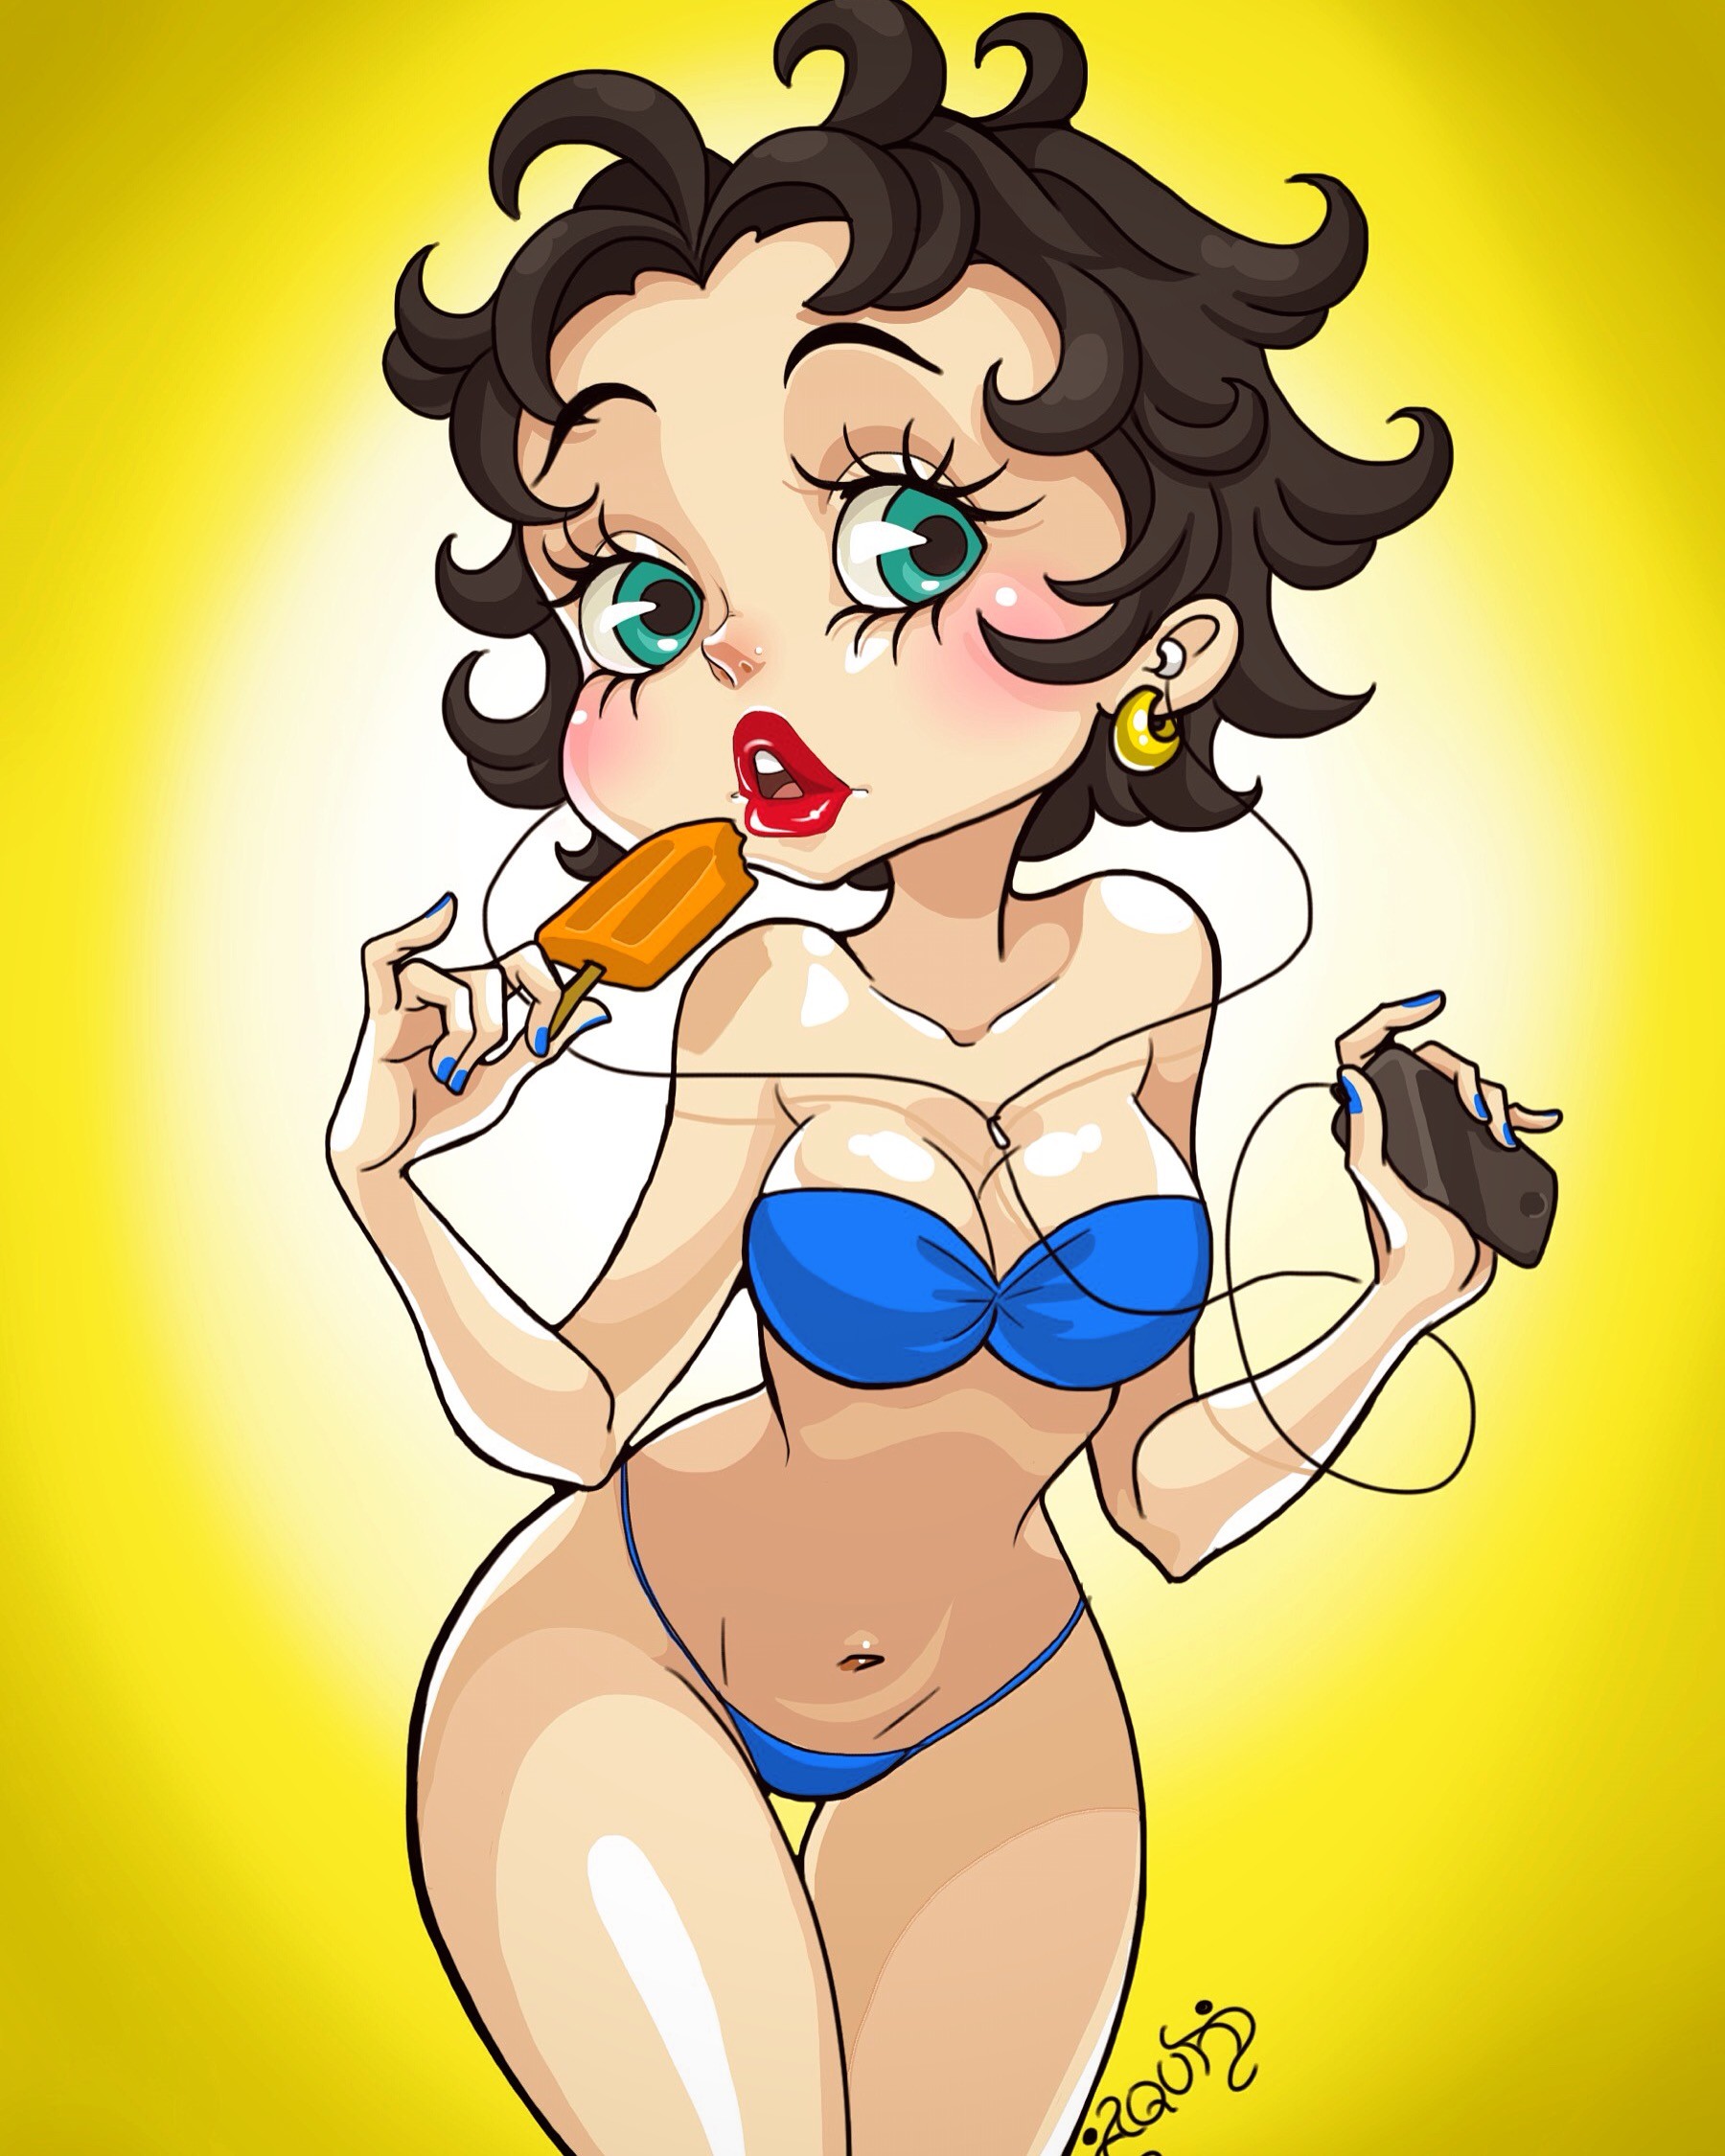 Betty Boop by me.